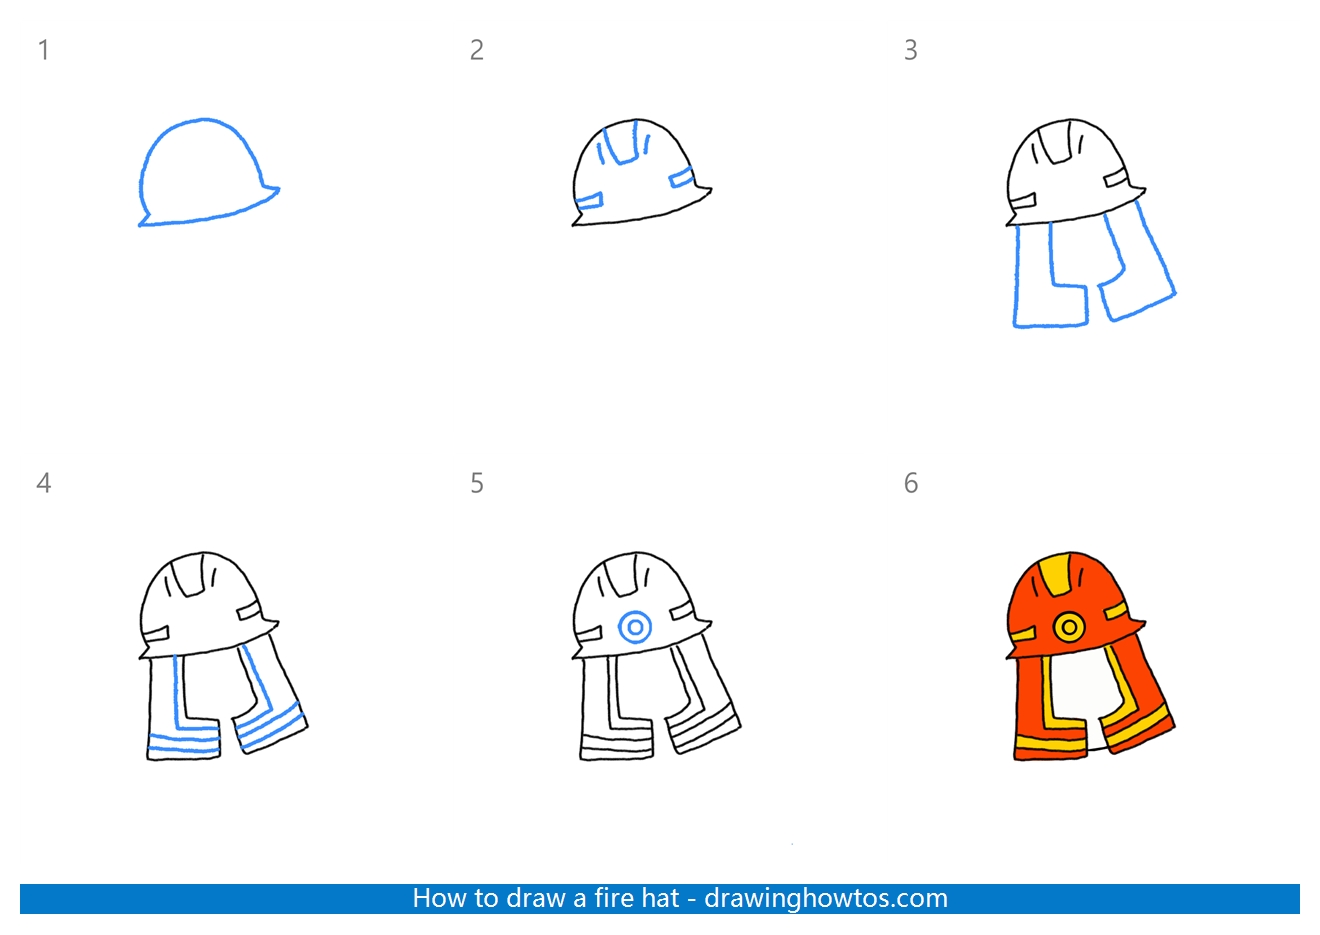 How to Draw a Fire Helmet Step by Step